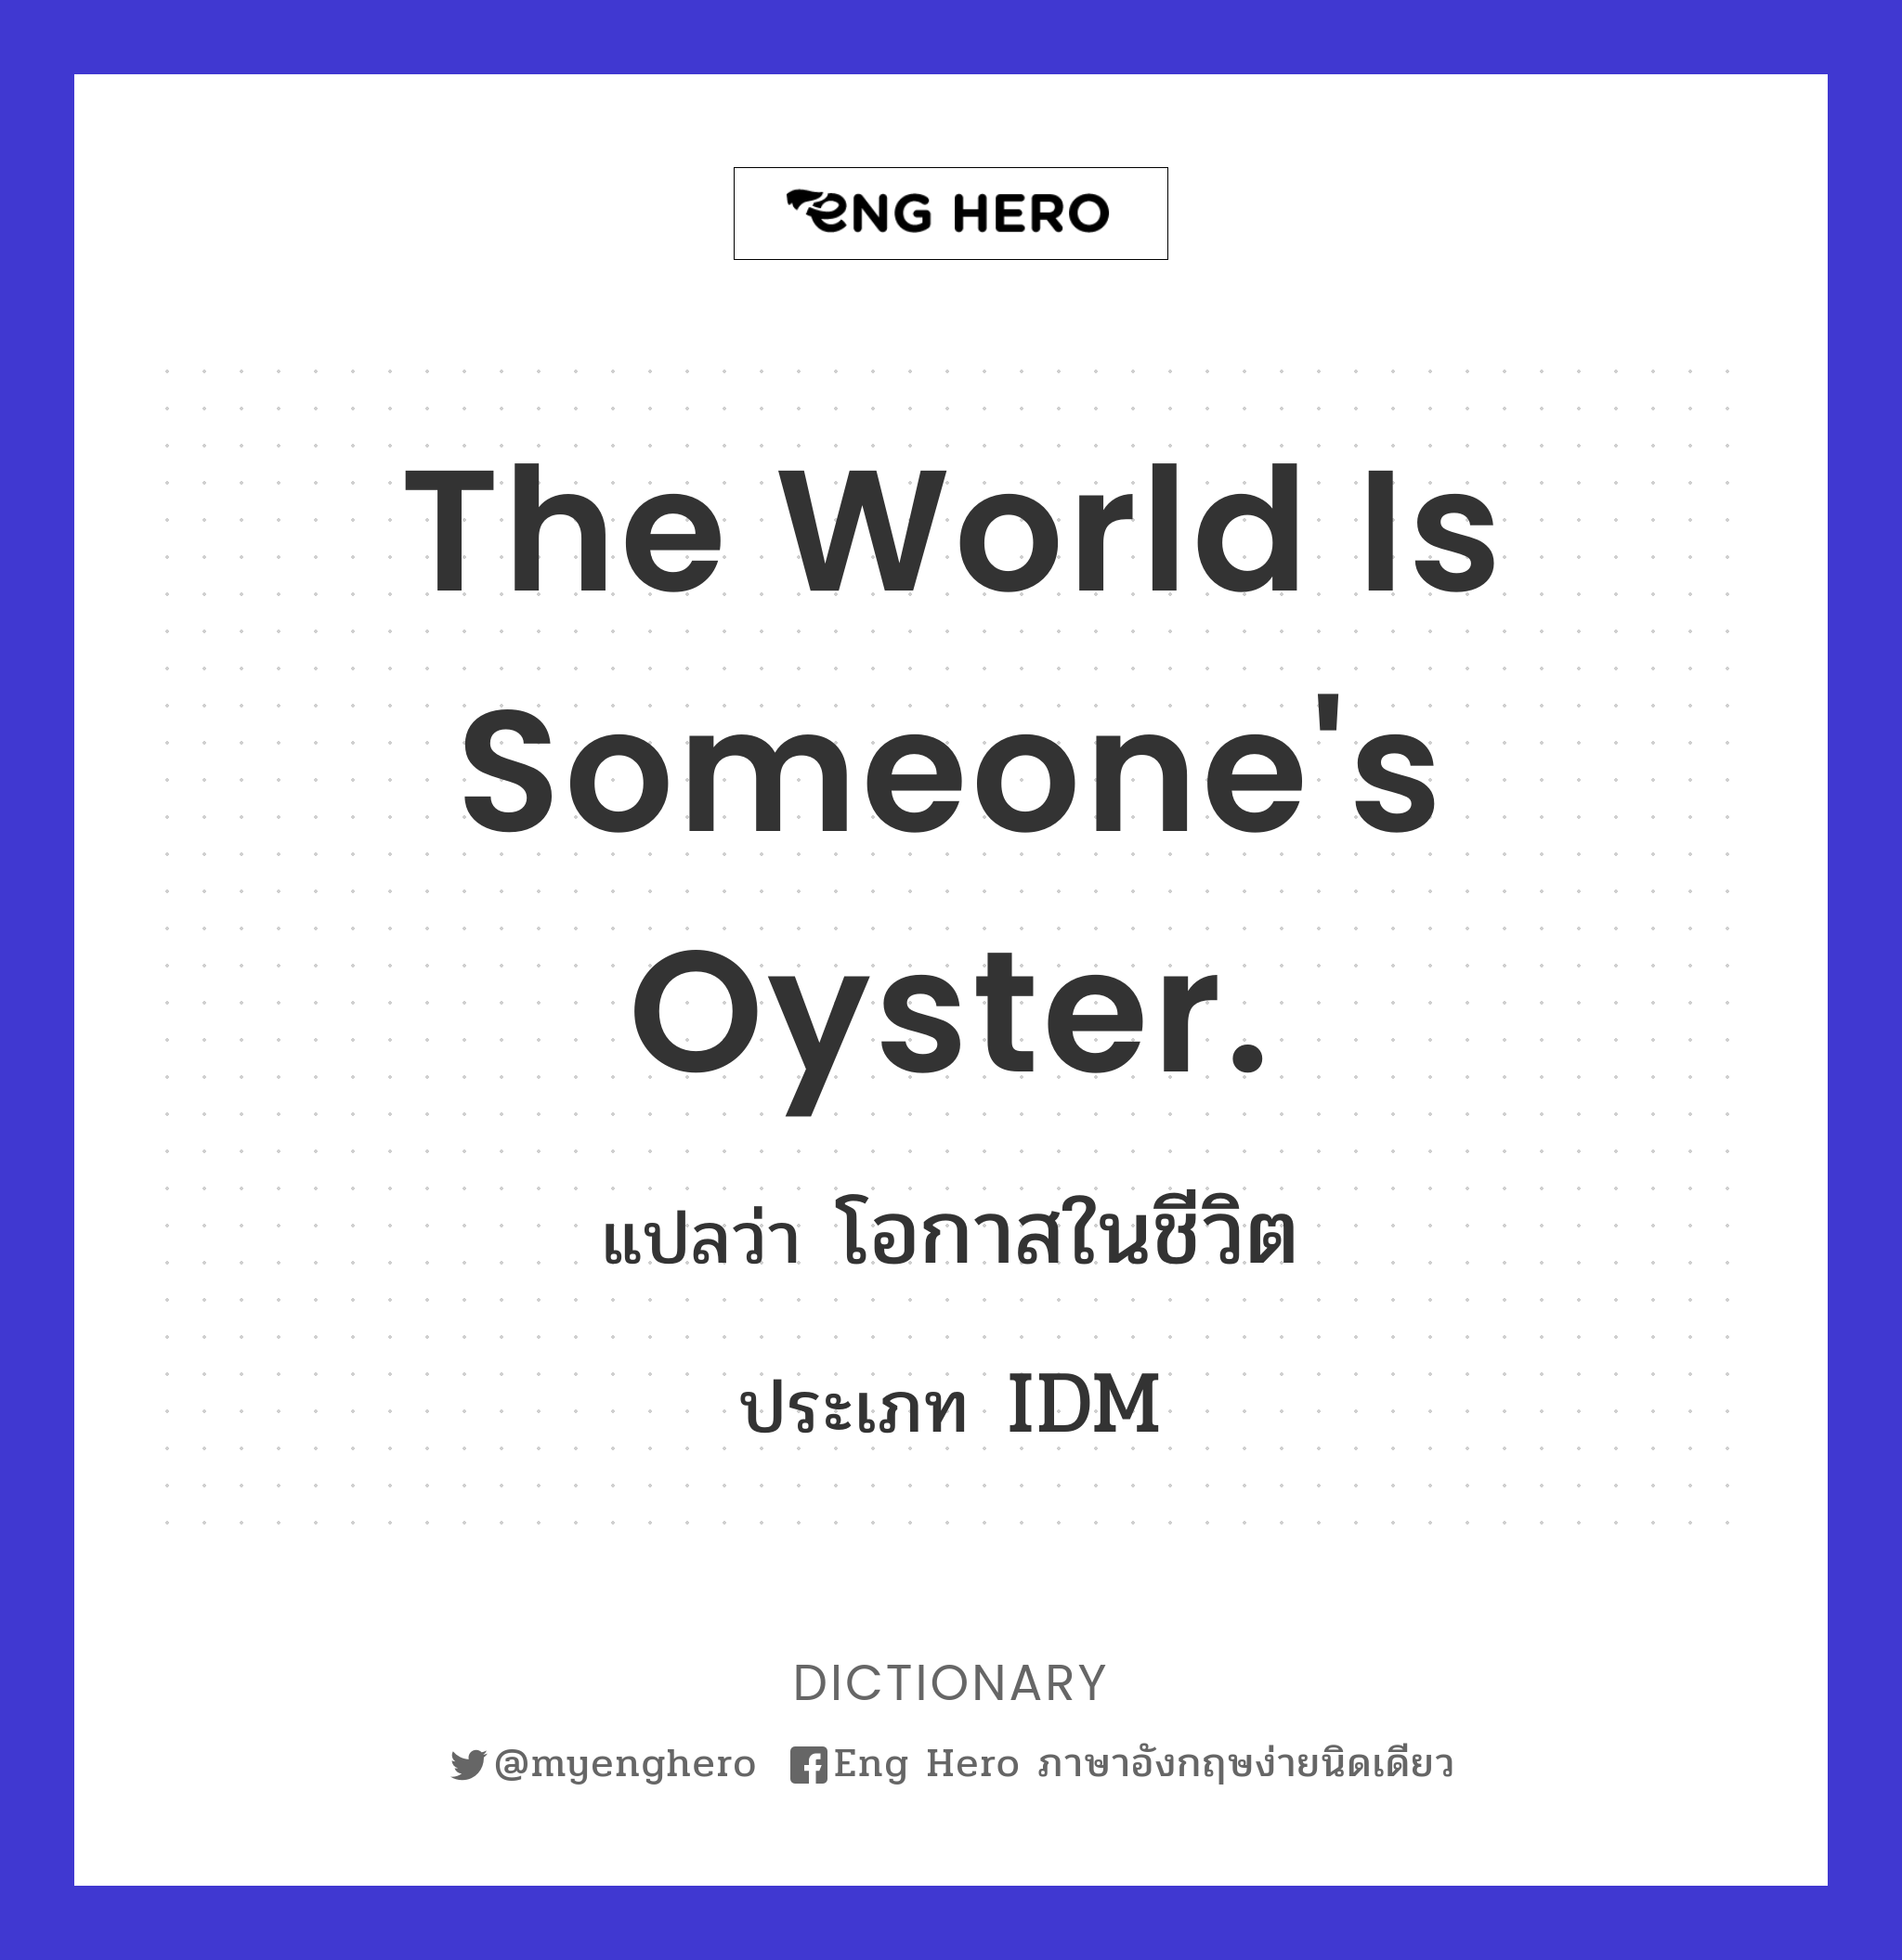 The world is someone's oyster.